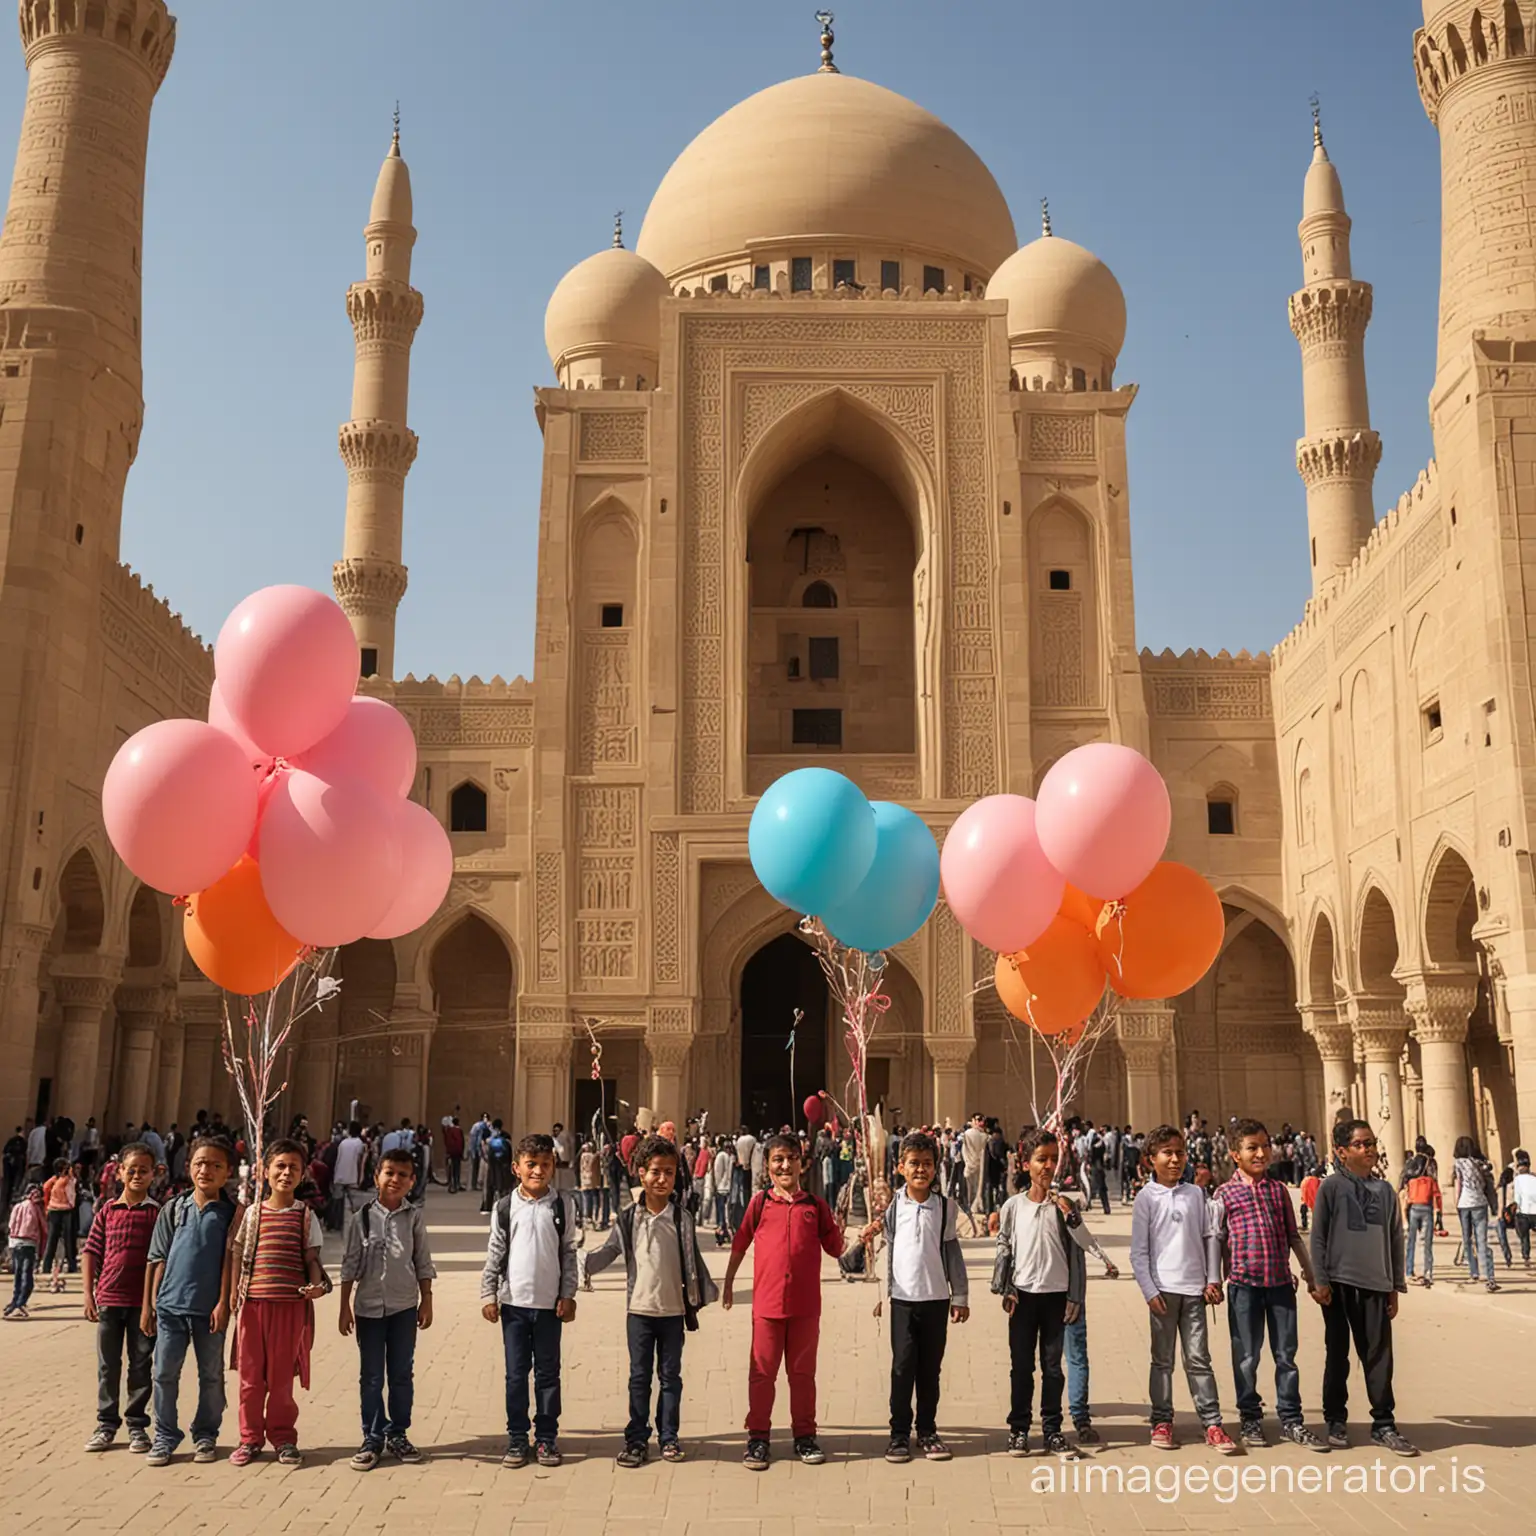 Egypt kids with big balloons in front of a mosque